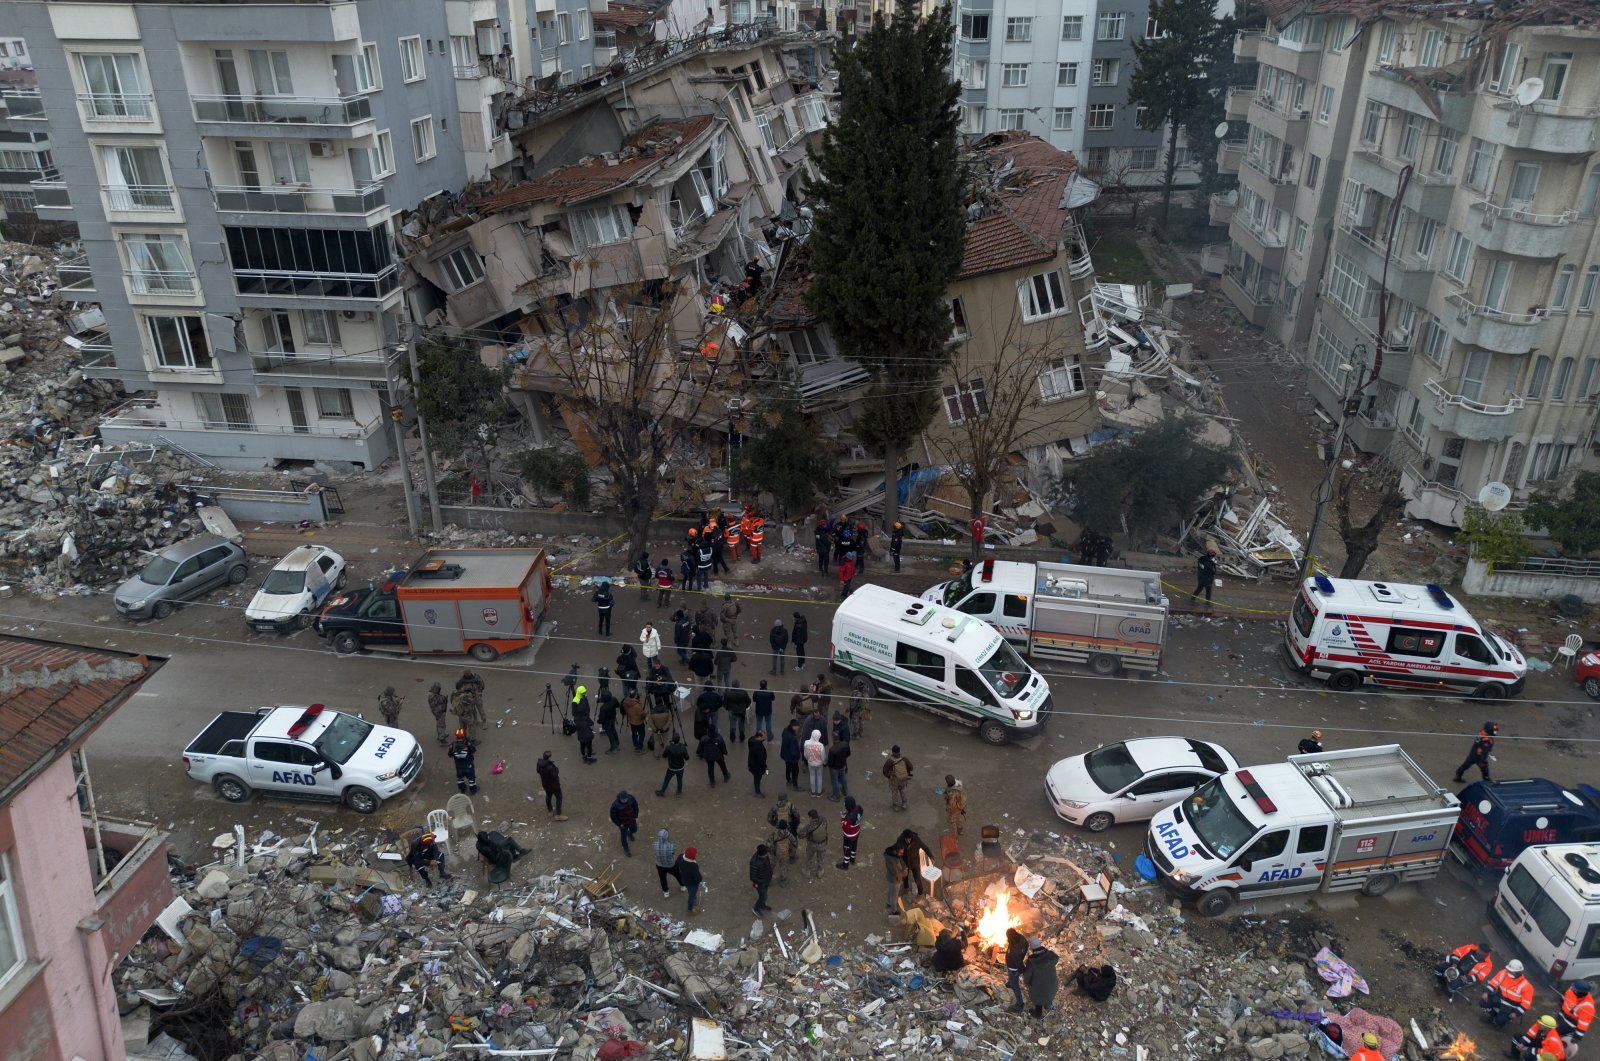 An aerial view shows people in chaos near collapsed buildings following the recent earthquakes in Hatay, Türkiye, Feb. 21, 2023. (IHA Photo)